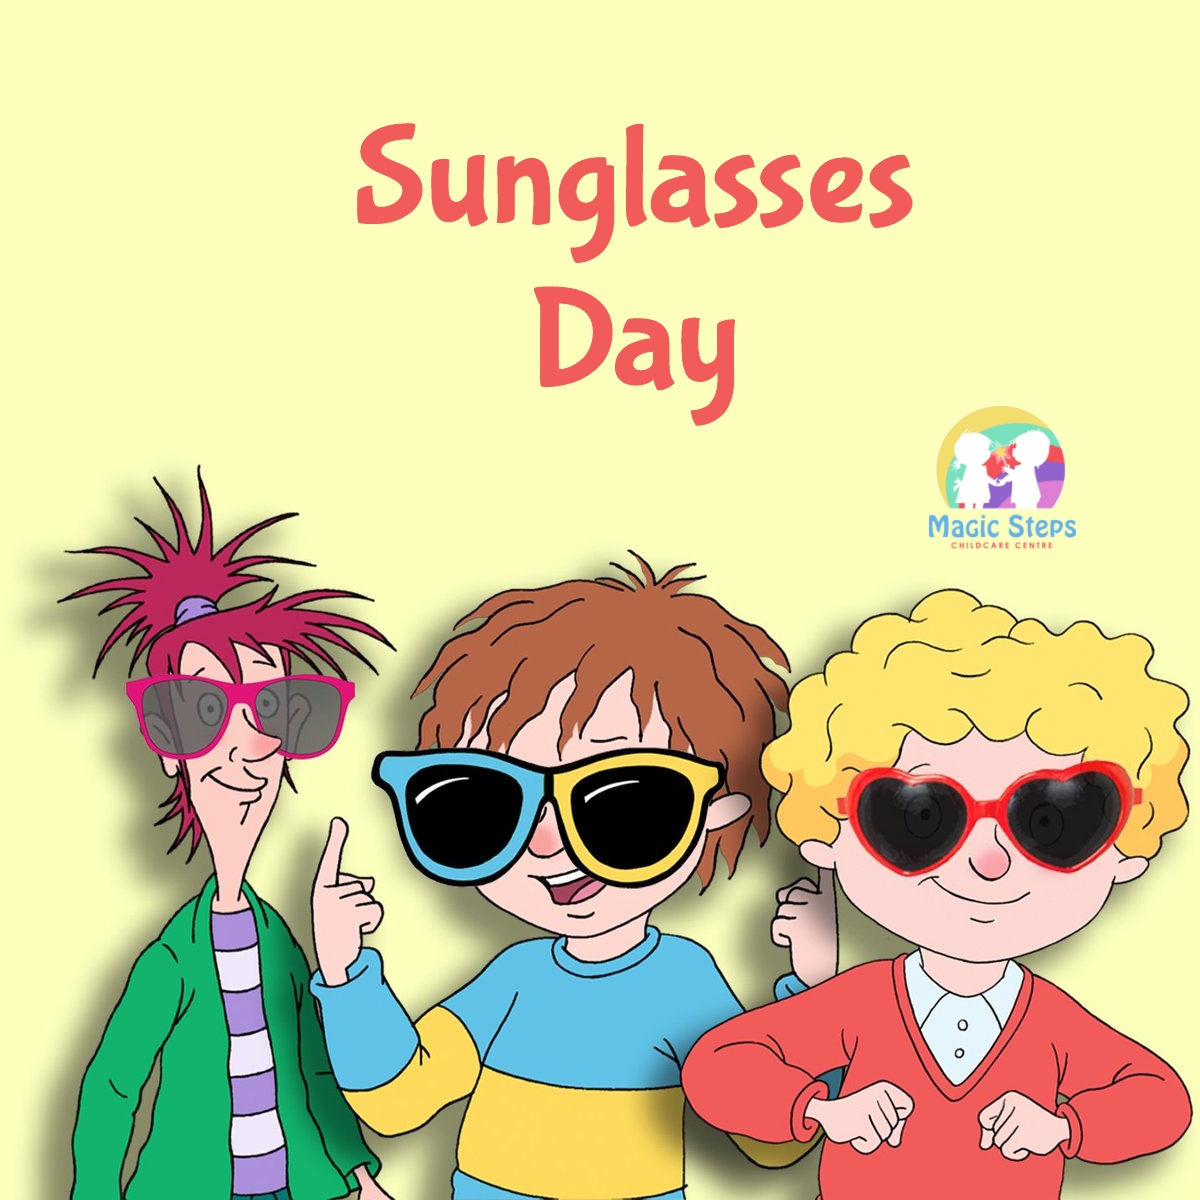 Sunglasses Day- Tuesday 19th July